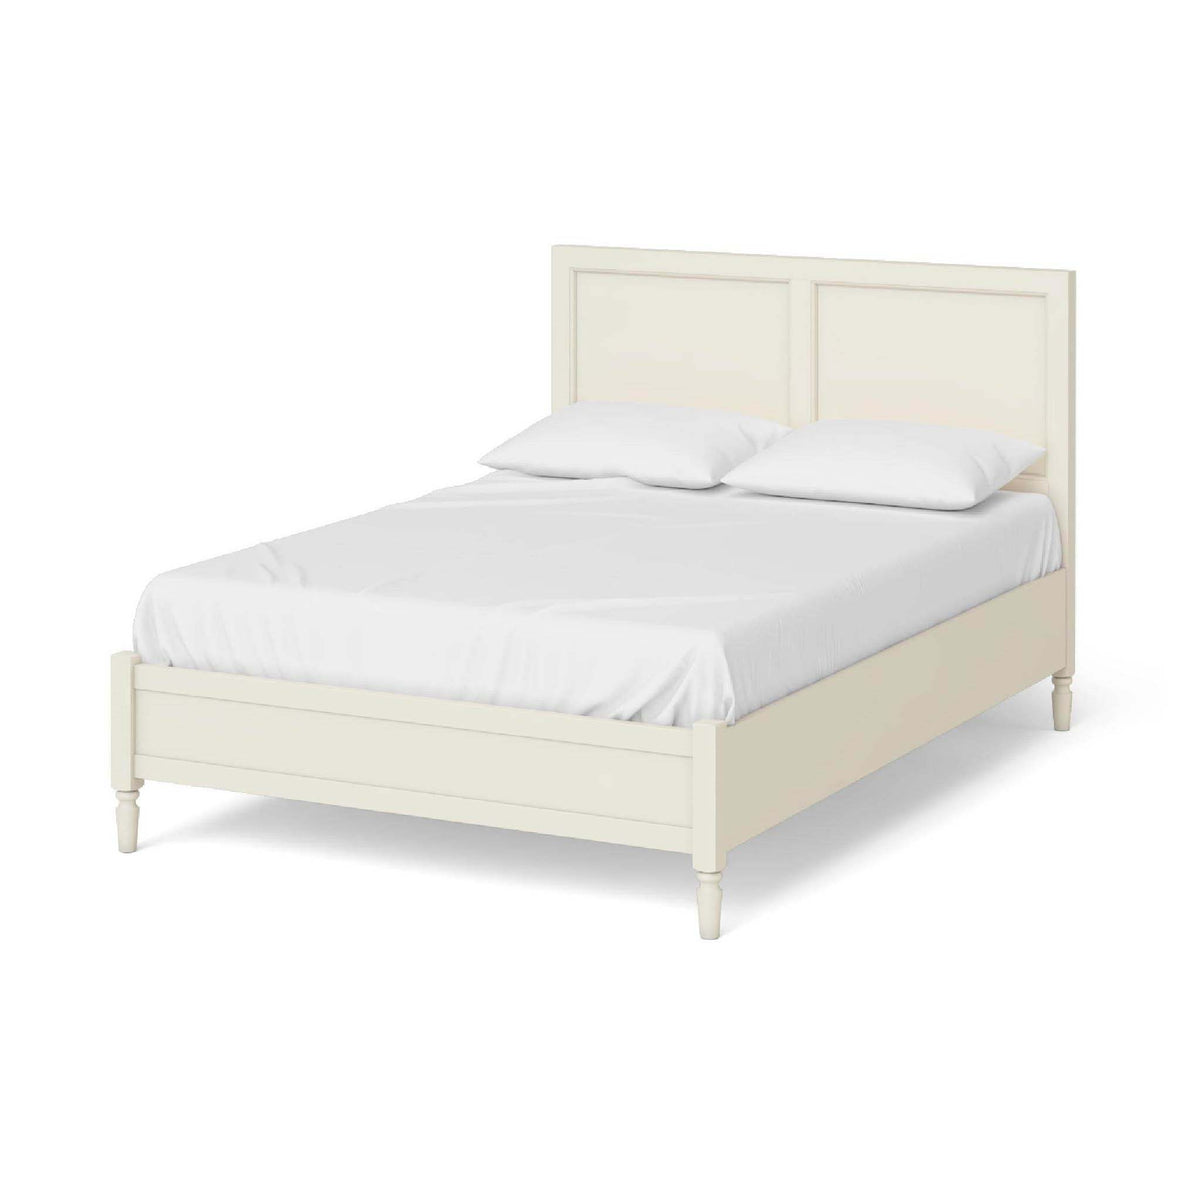 The Muslanne Cream 4'6" Double Bed Frame  